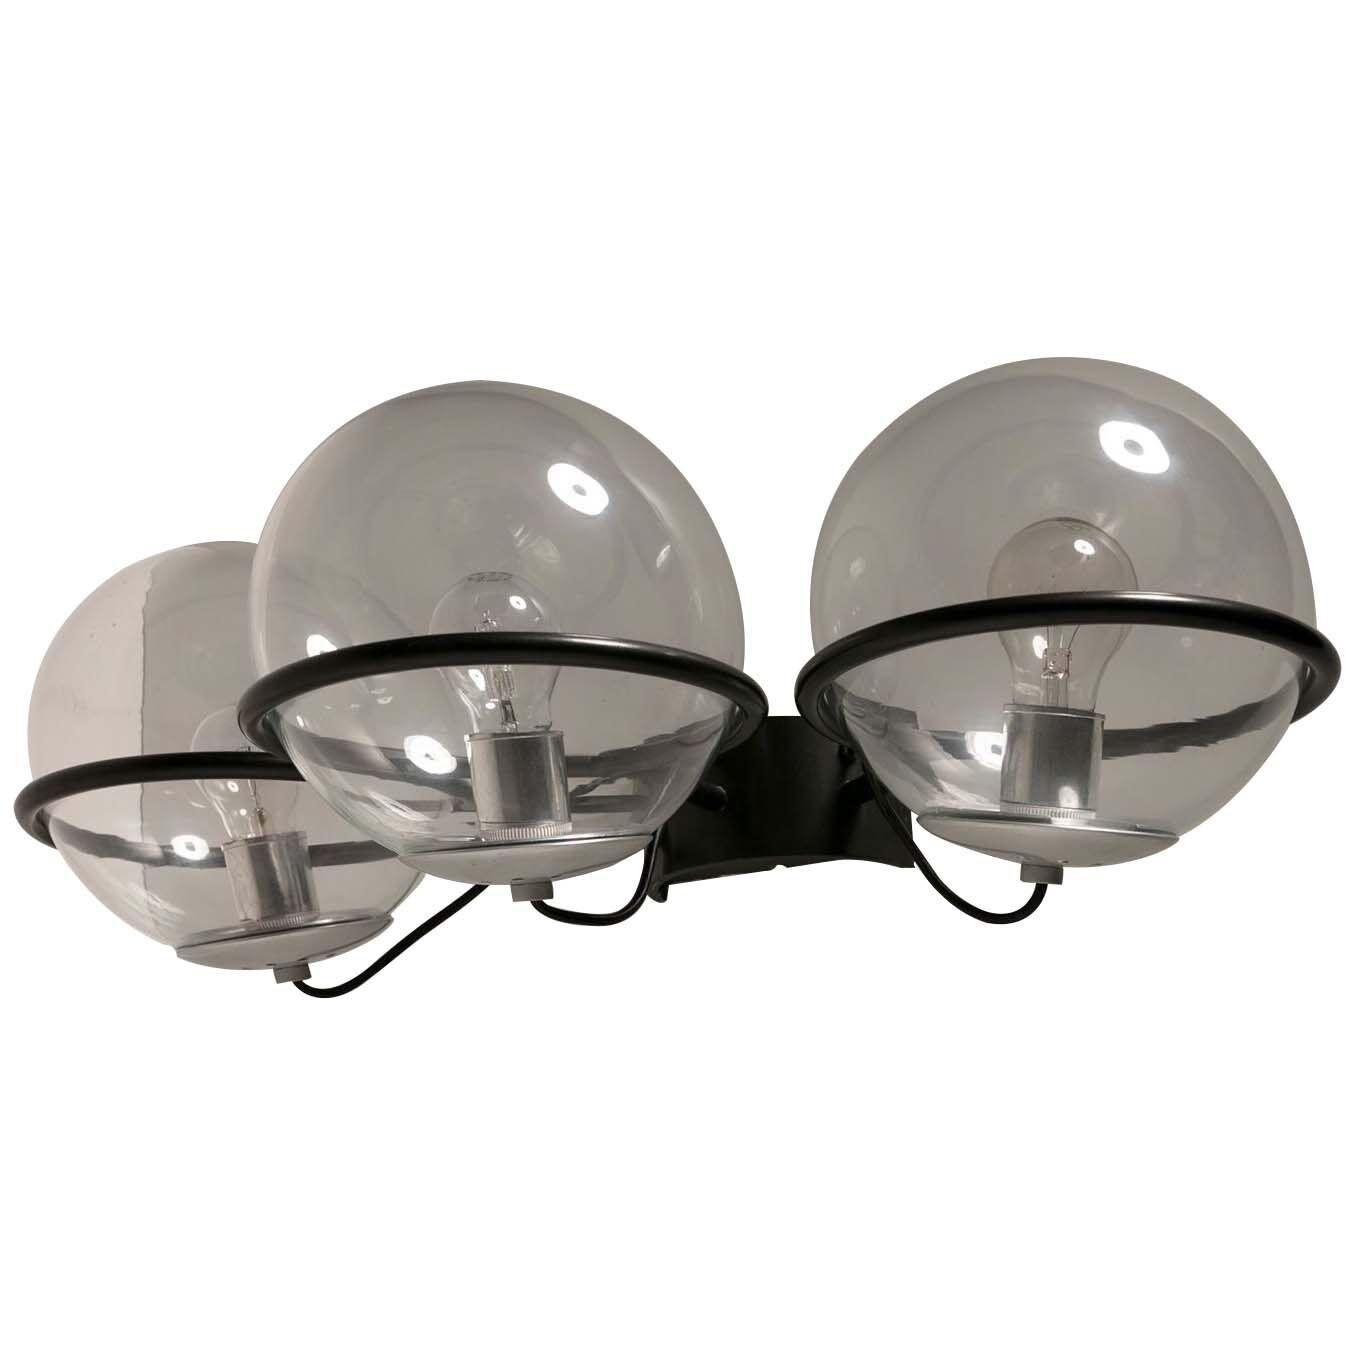  Pair of Wall Lamps Model 238/3 by Gino Sarfatti for Arteluce